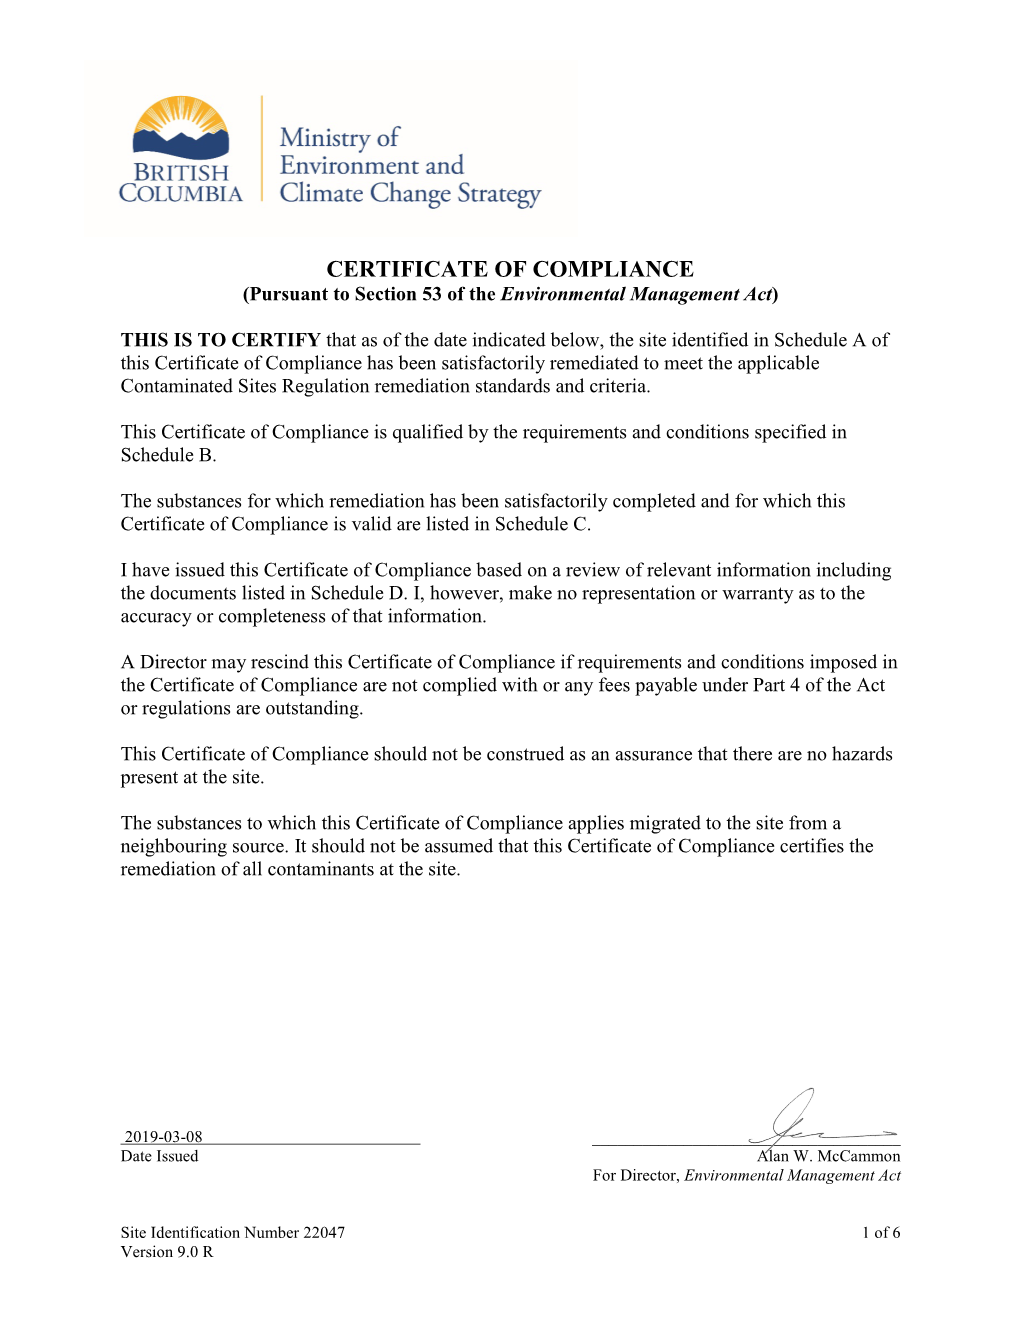 CERTIFICATE of COMPLIANCE (Pursuant to Section 53 of the Environmental Management Act)